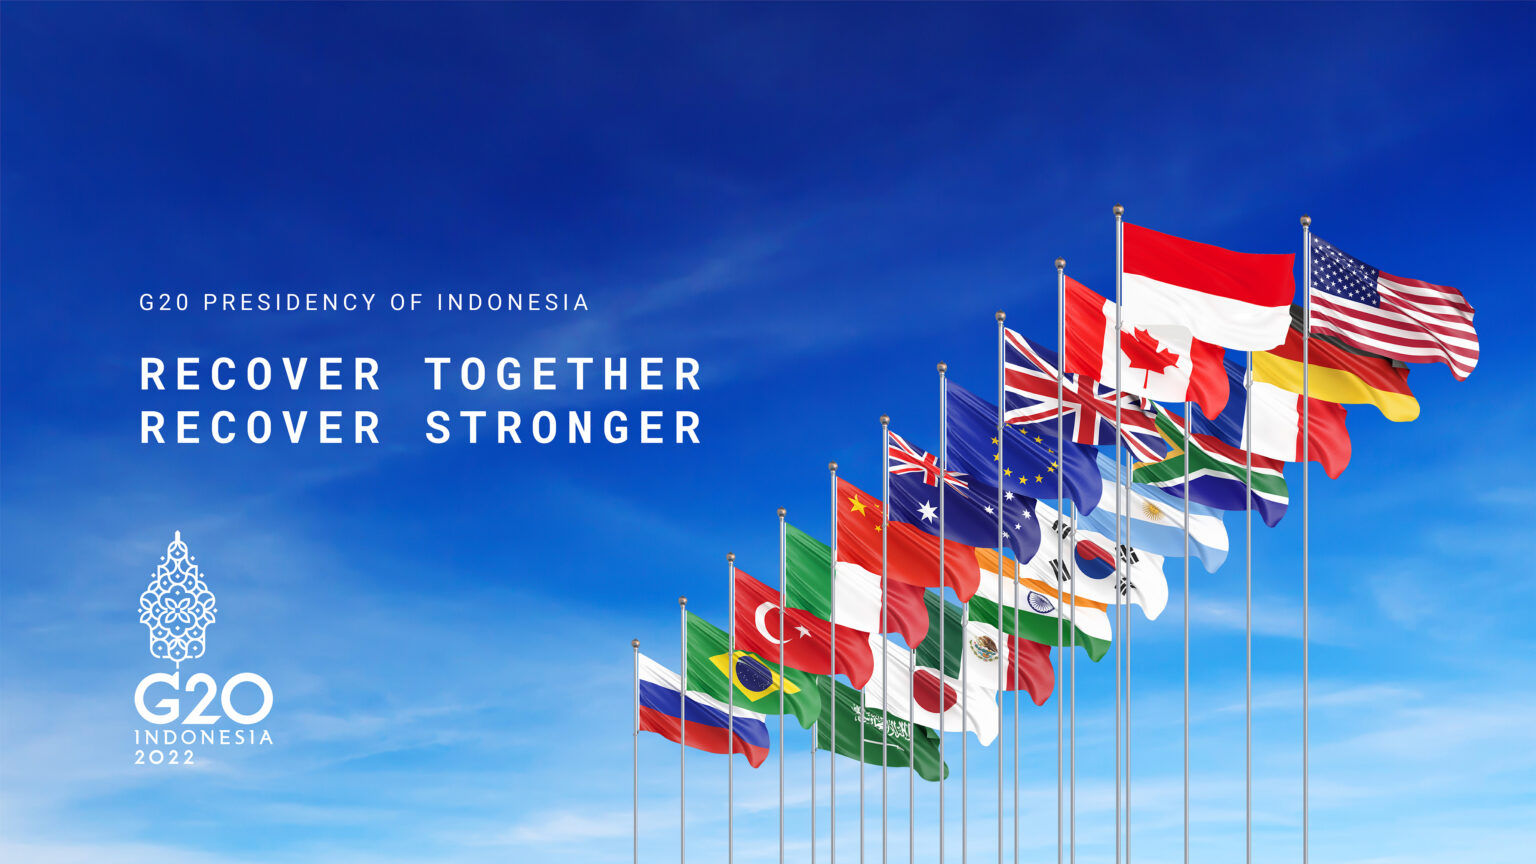 Presidensi G20 Indonesia. Recover Together, Recover Stronger.